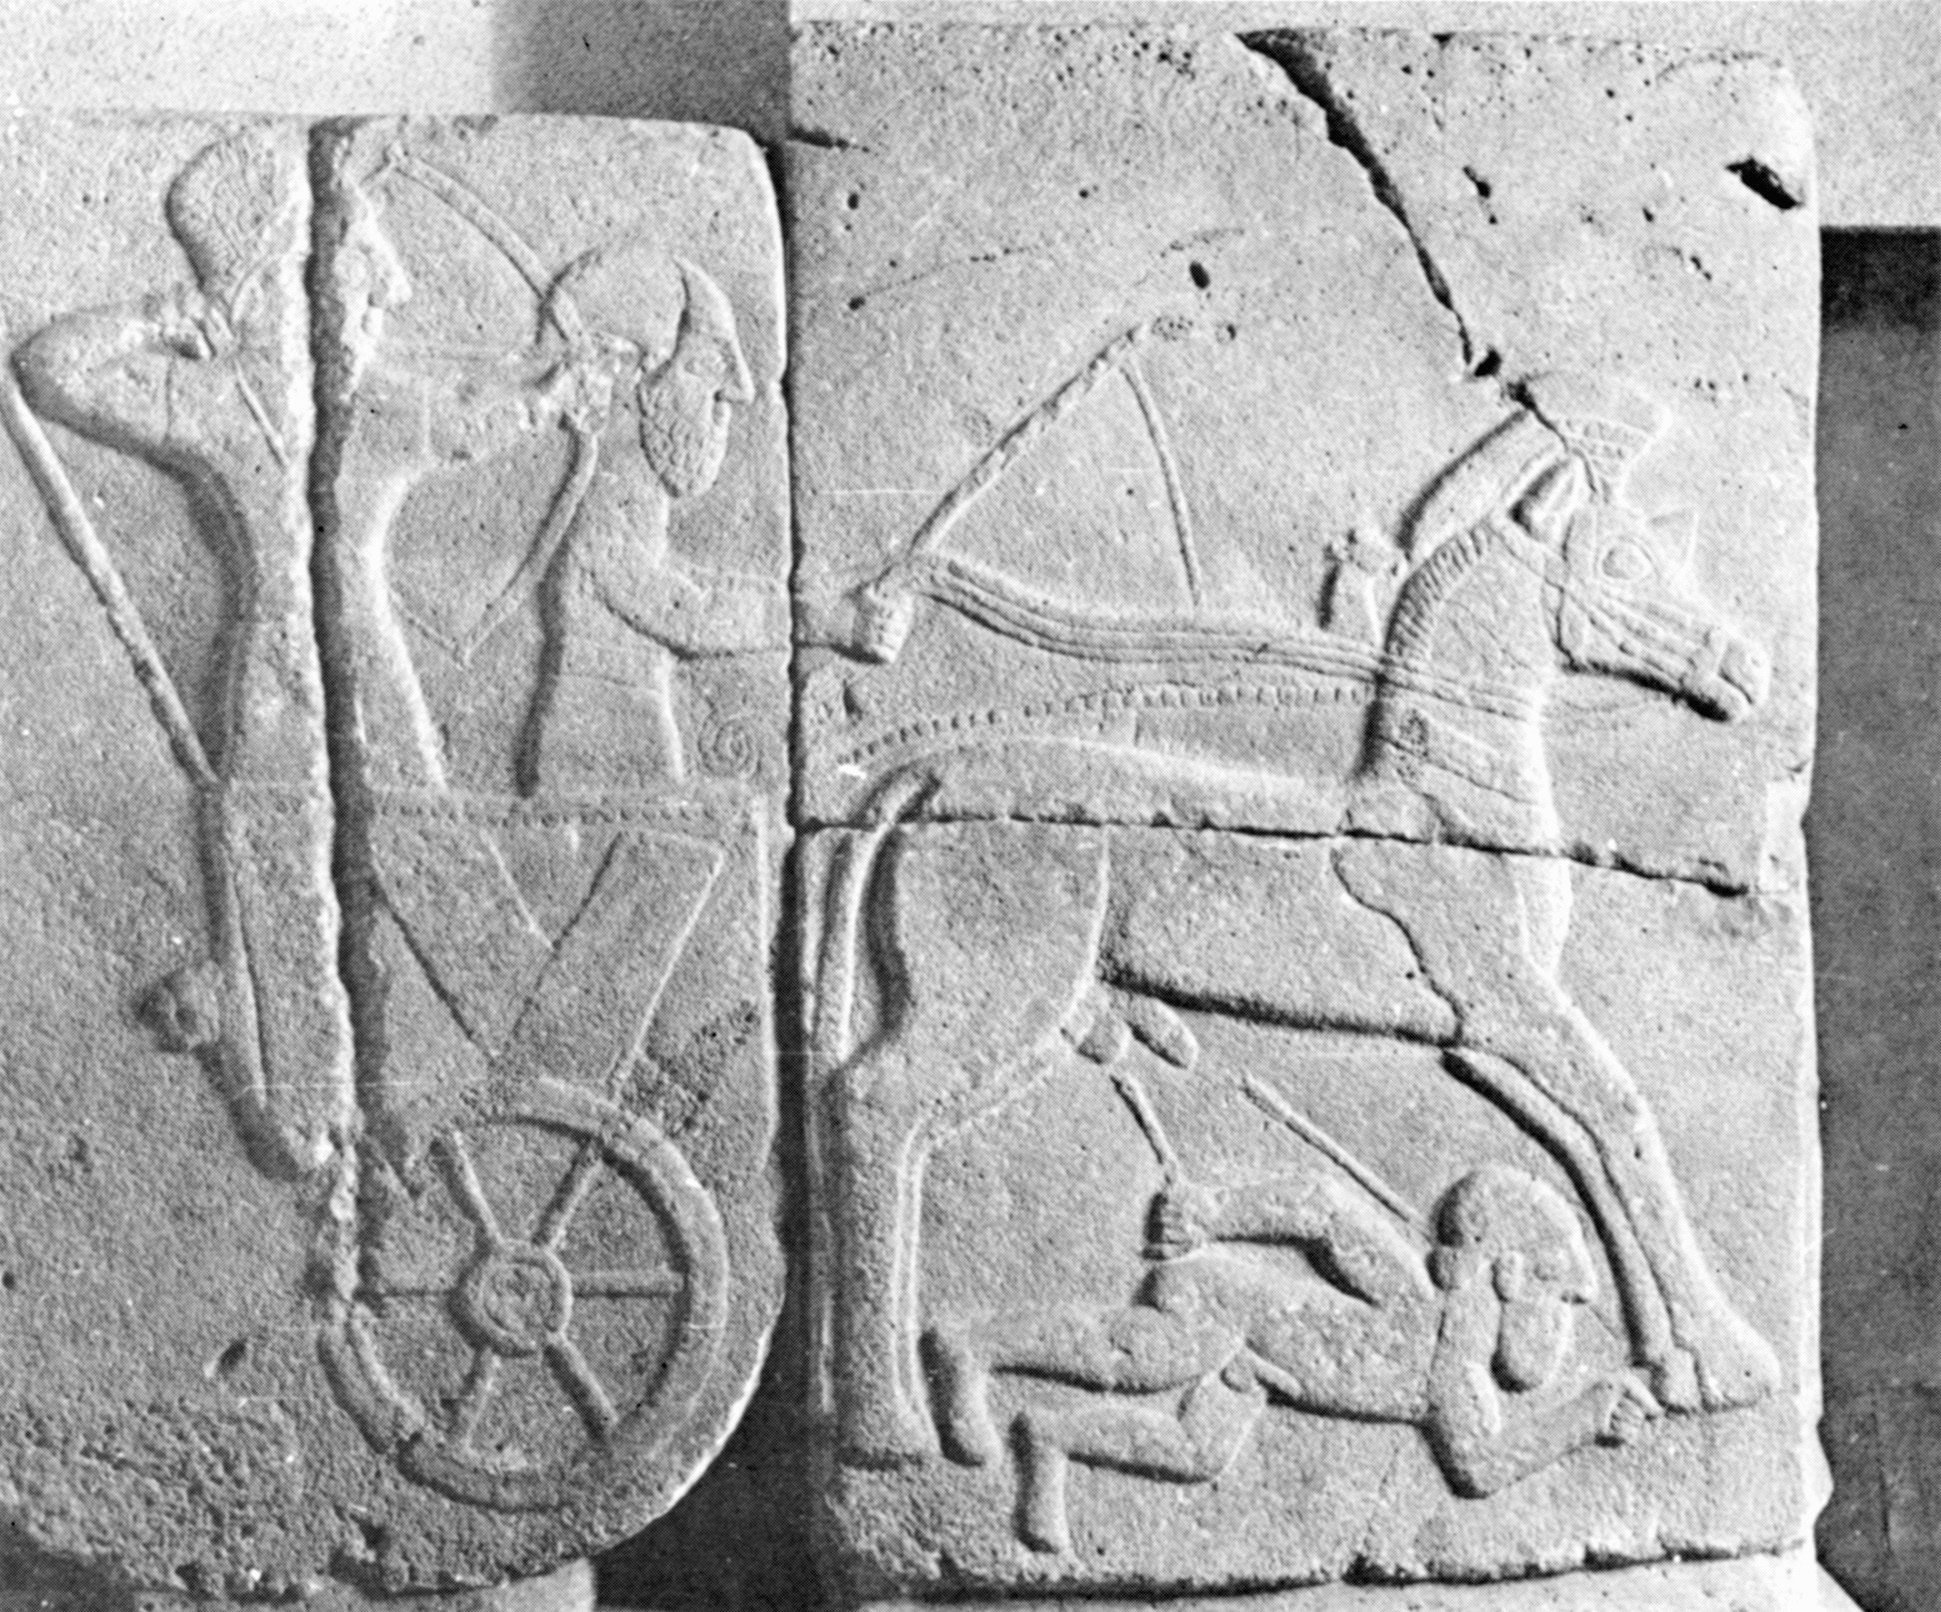 A wall carving of a Hittite chariot trampling an enemy warrior, felled by arrows in his head and buttocks. The horses are stiffly rendered; whether this was the carver’s intent or evidence of his lack of skill, it is an accurate depiction of the stately pace of chariotry in battle.